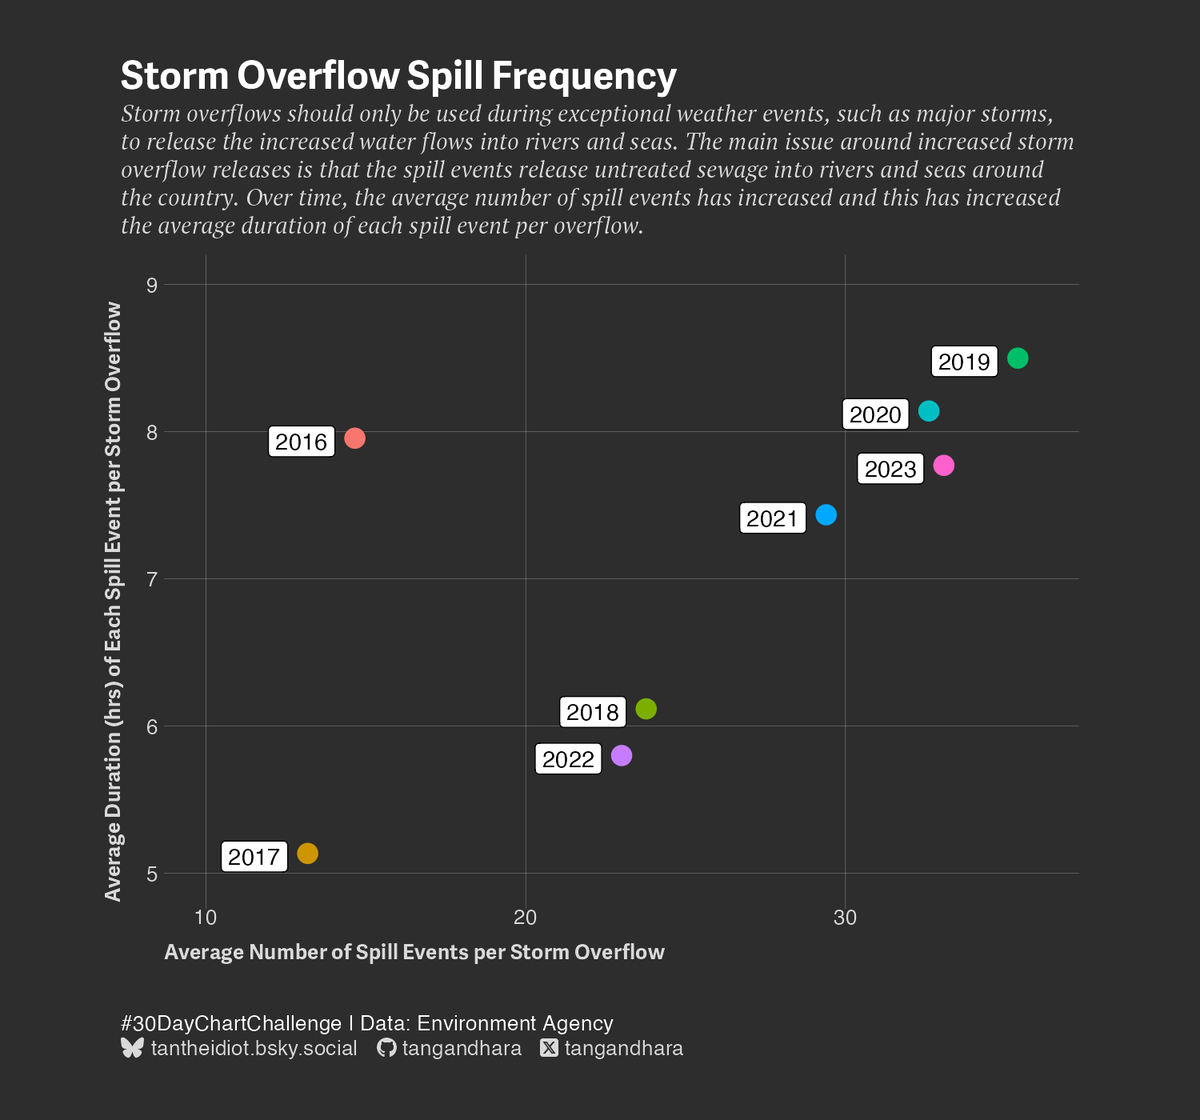 Day 20 of #30DayChartChallenge - correlation. The plot looks at storm overflow spill frequency for England since 2016. As average number of spill events have increased over time, so has the duration in hours per event for each overflow. #dataviz #ggplot2 #rstats